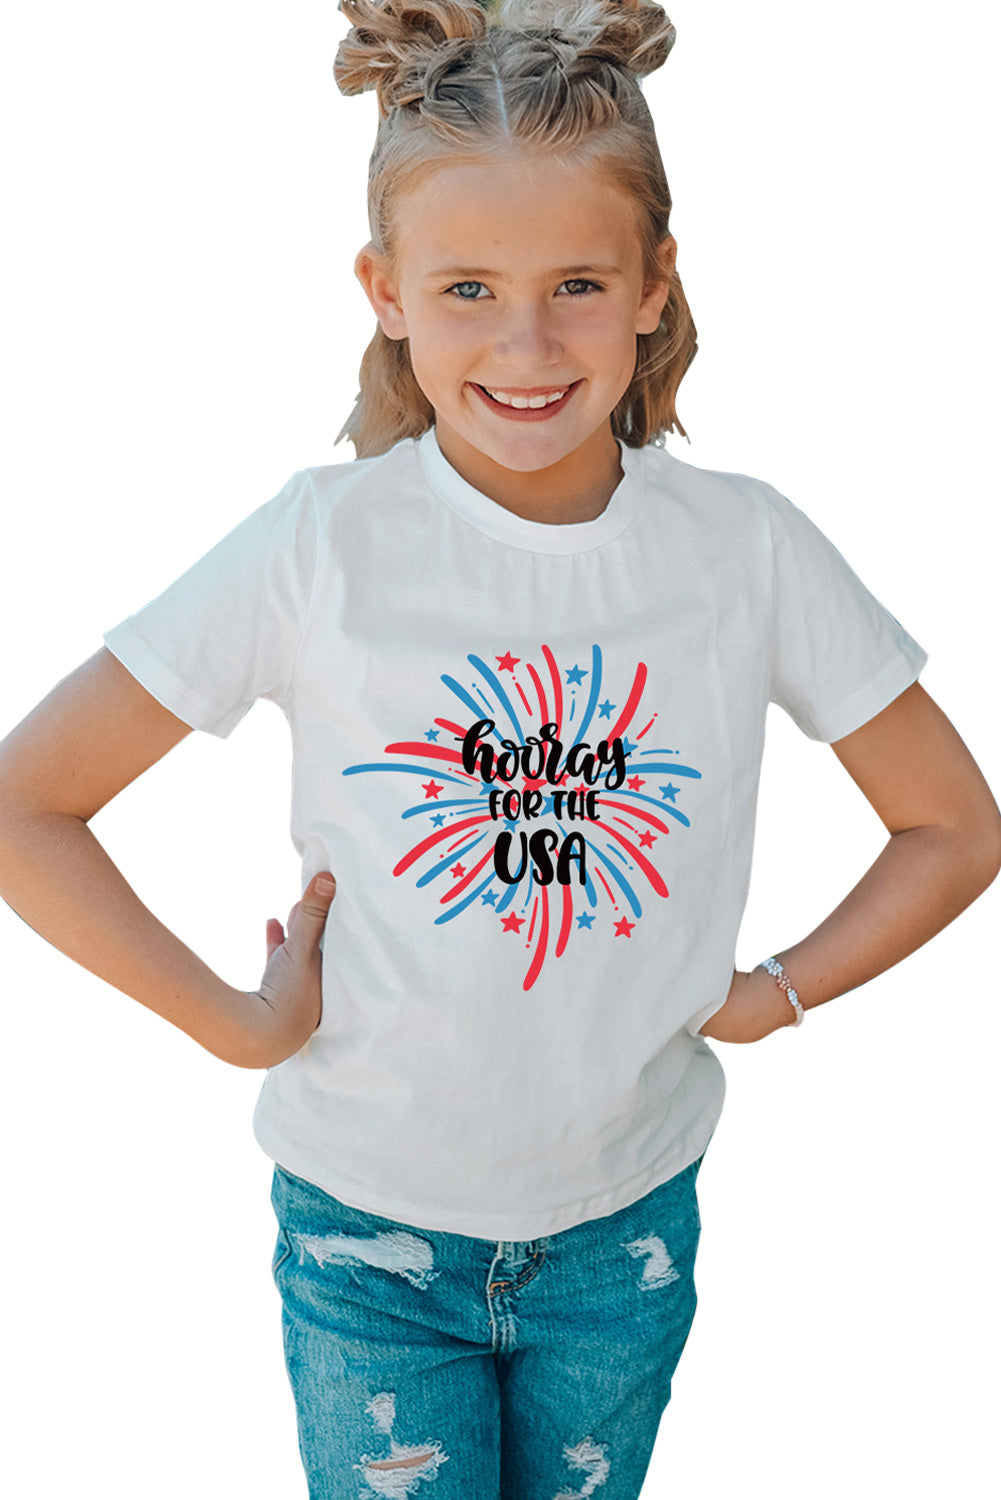 White Hoolay Of The USA Pattern Print Short Sleeve Girl's Top Family T-shirts JT's Designer Fashion